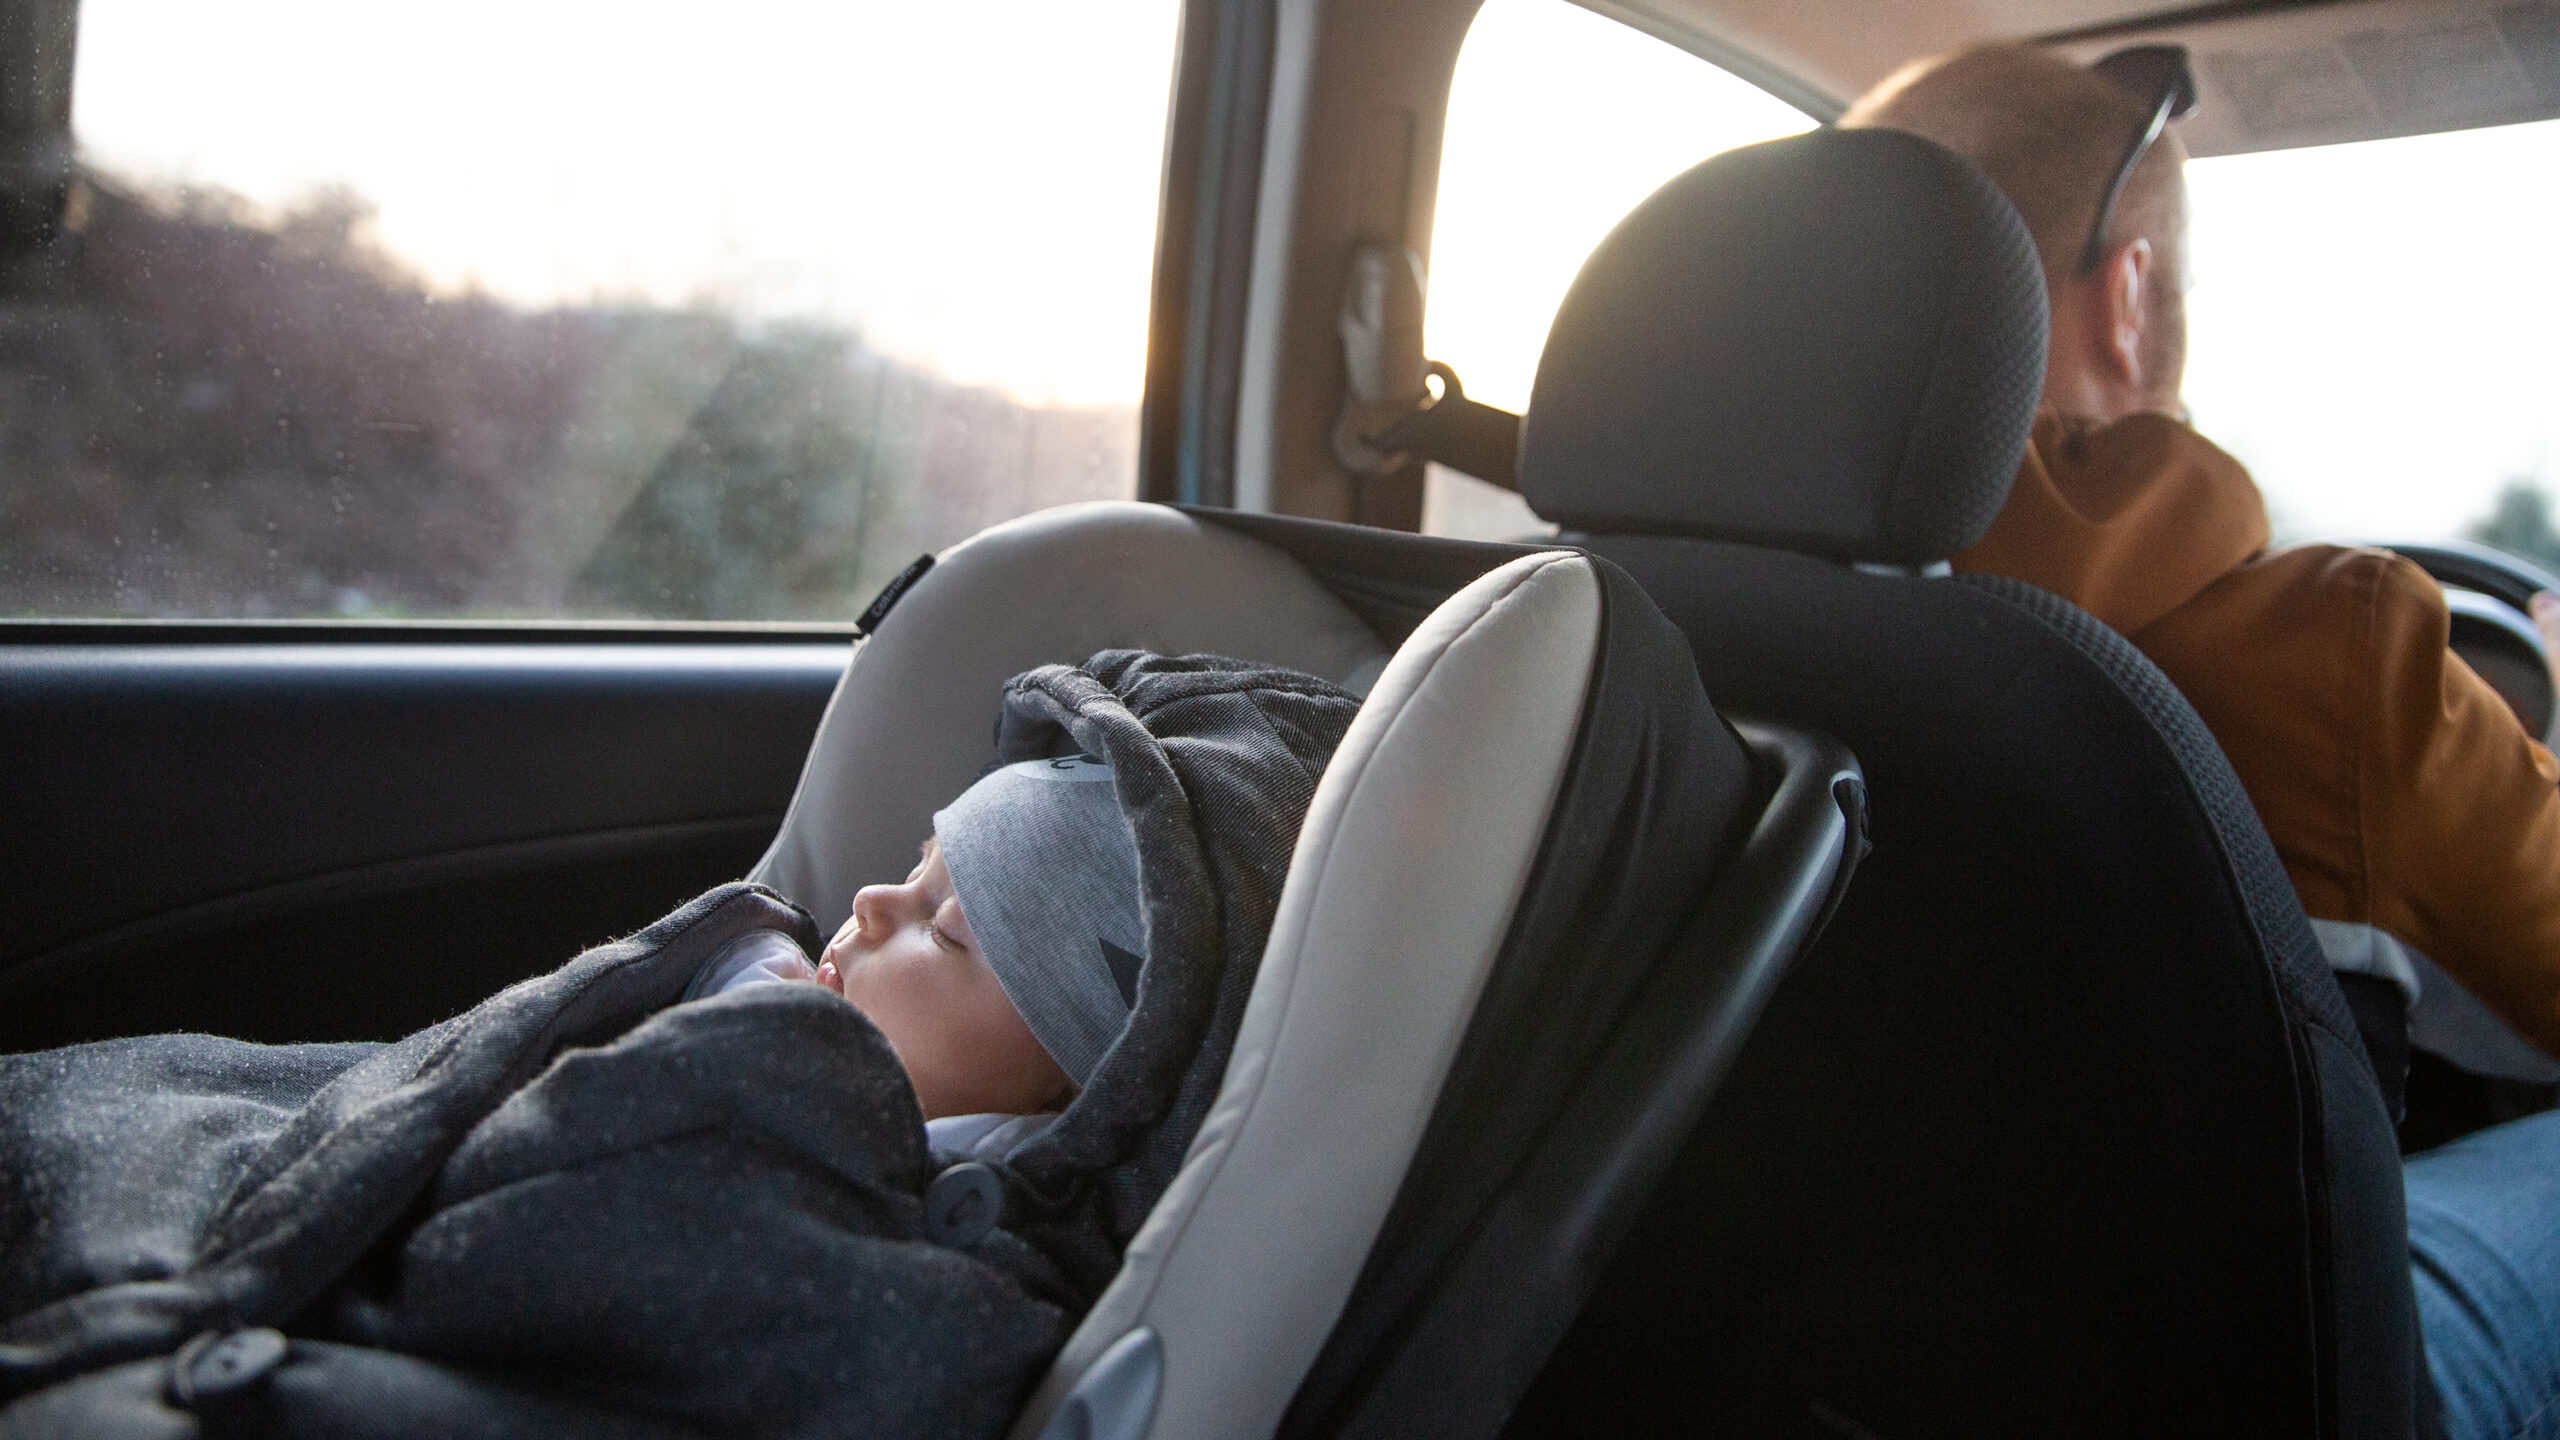 What to know about keeping children safe — and warm — in the car during the winter